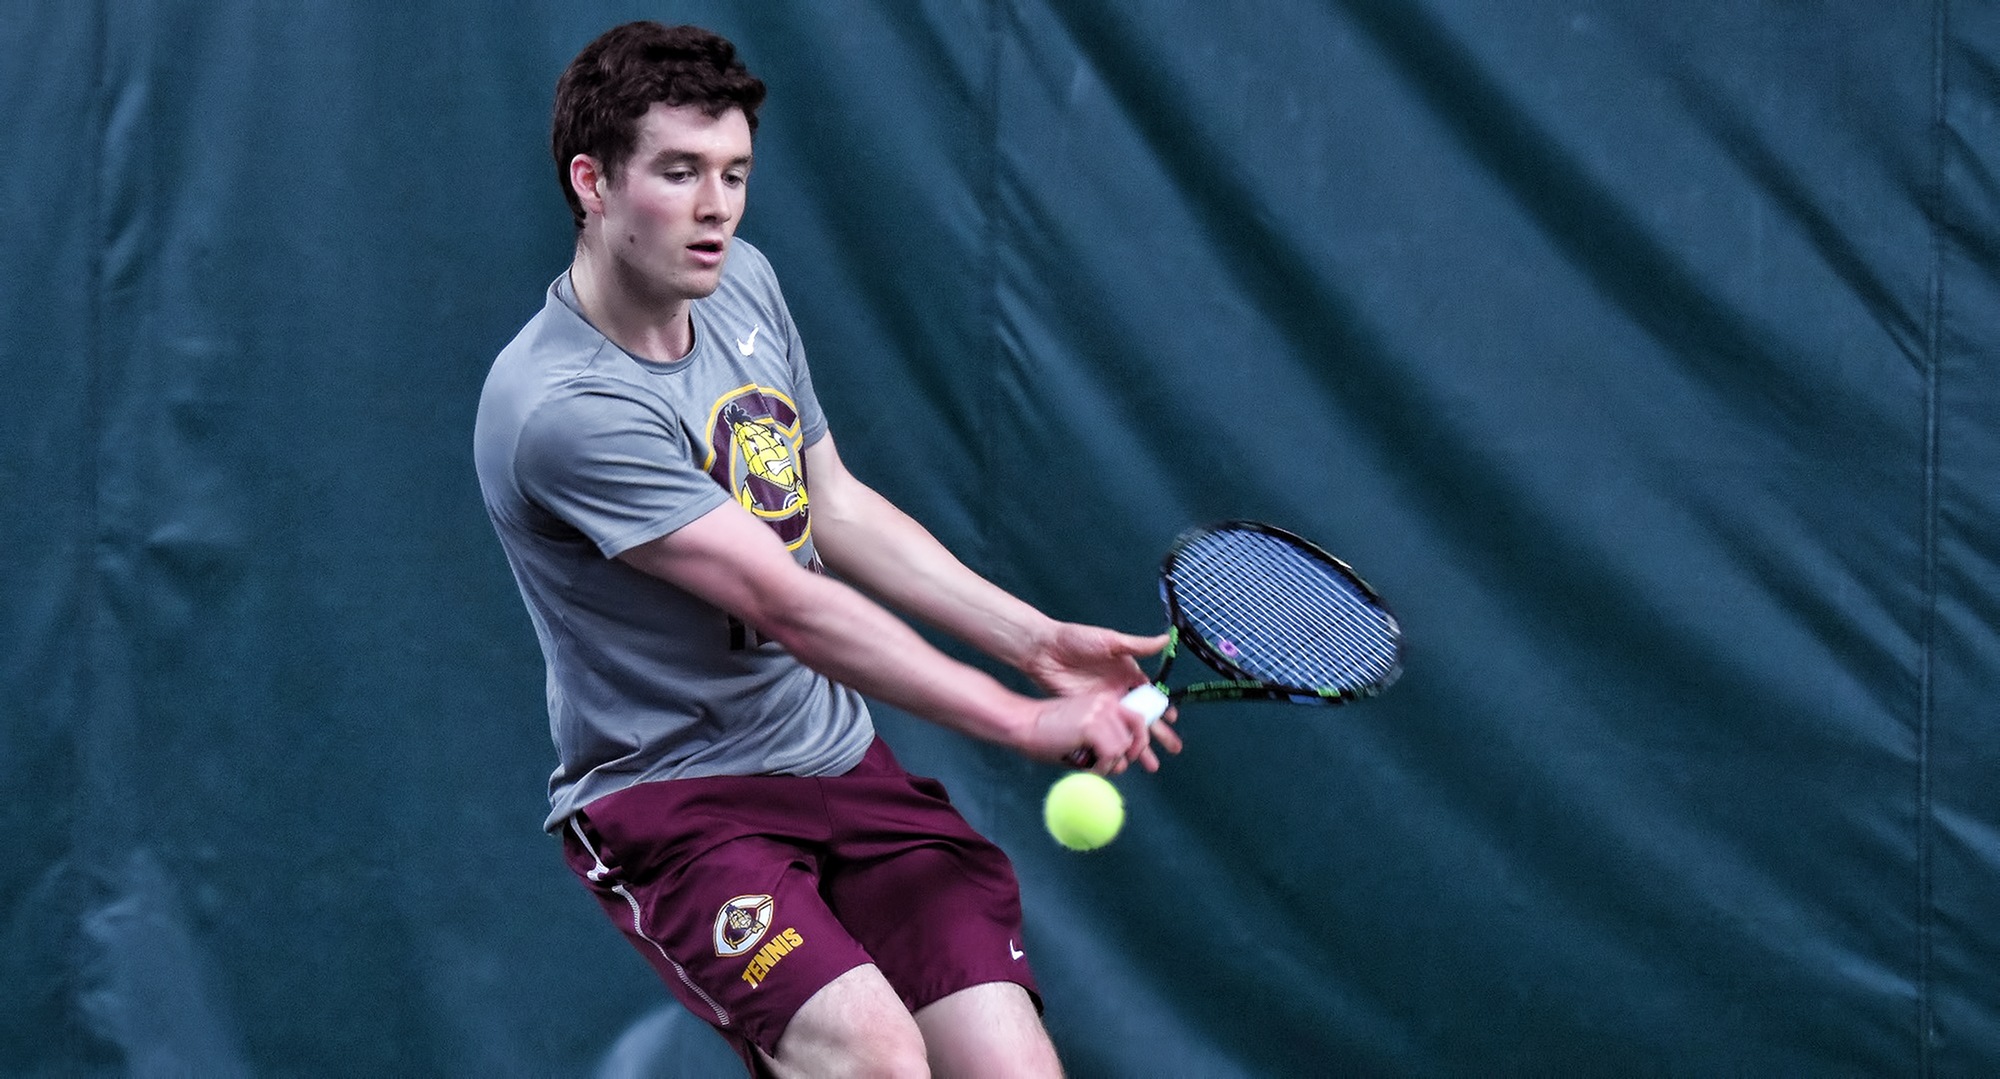 Erik Porter was one of four seniors who helped the Cobbers post a complete 9-match bagel in the season opener at Crown.